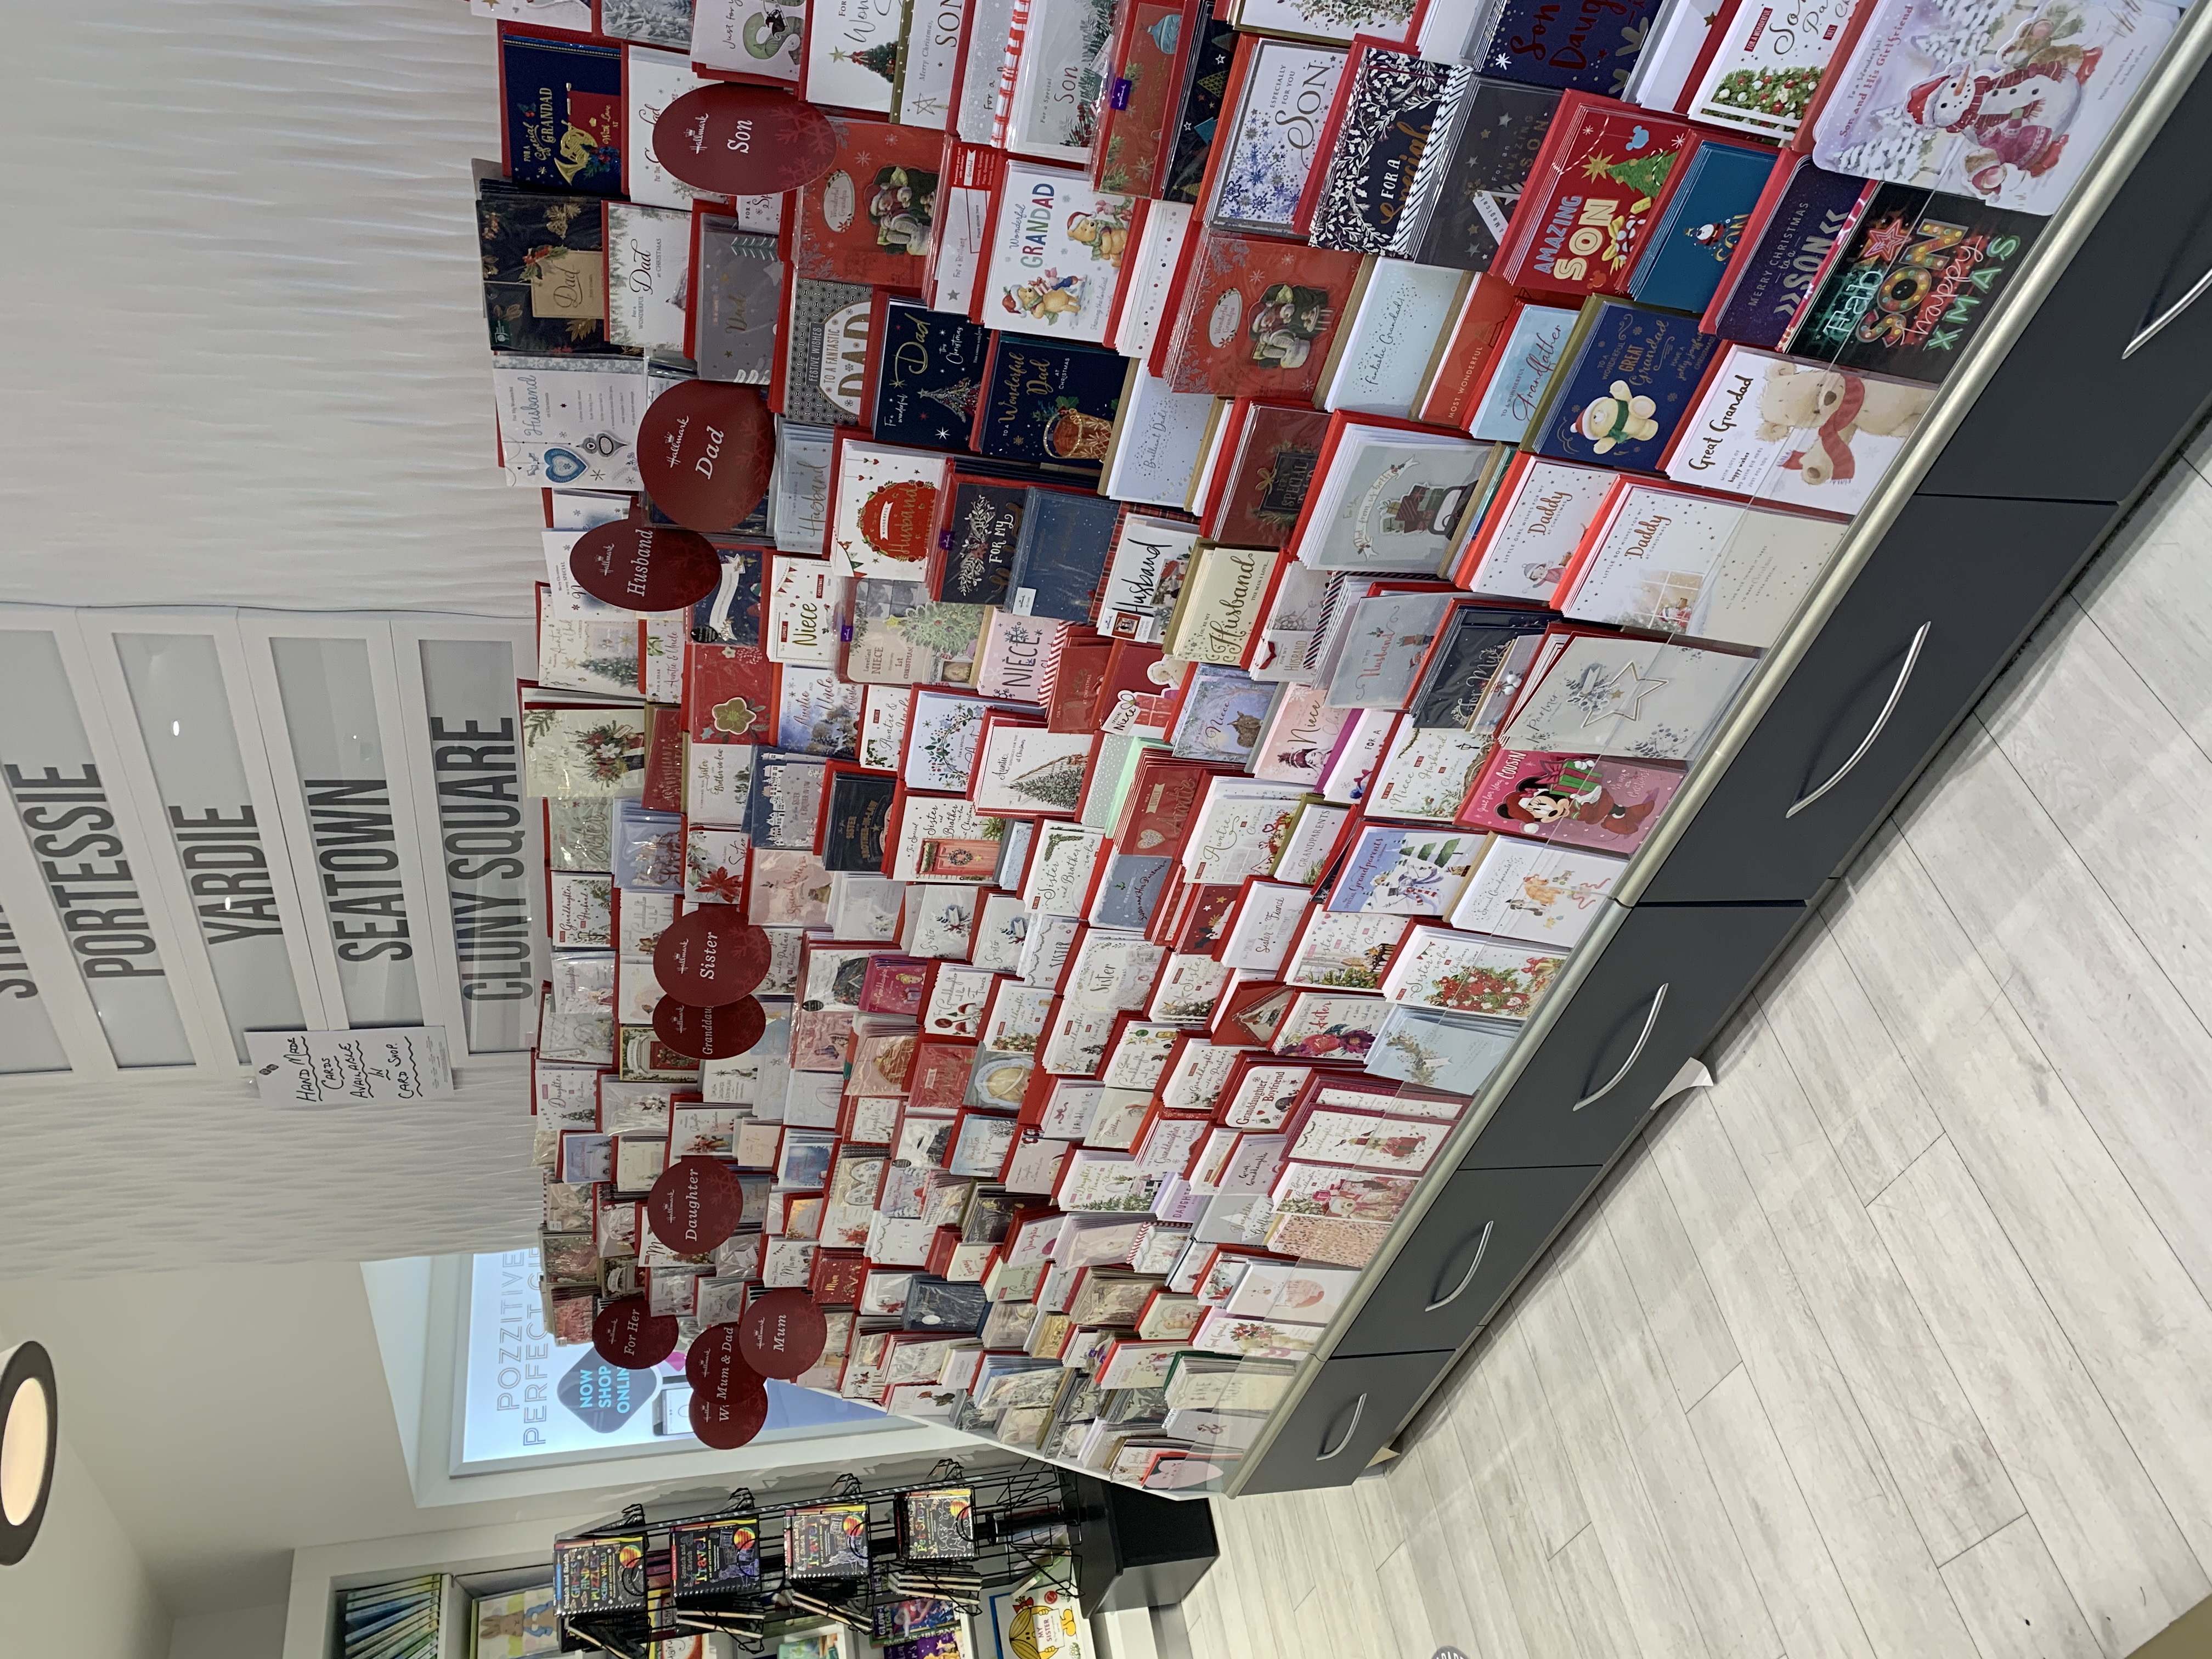 Above: One of the Christmas card displays in David’s shops which are full of special captions.